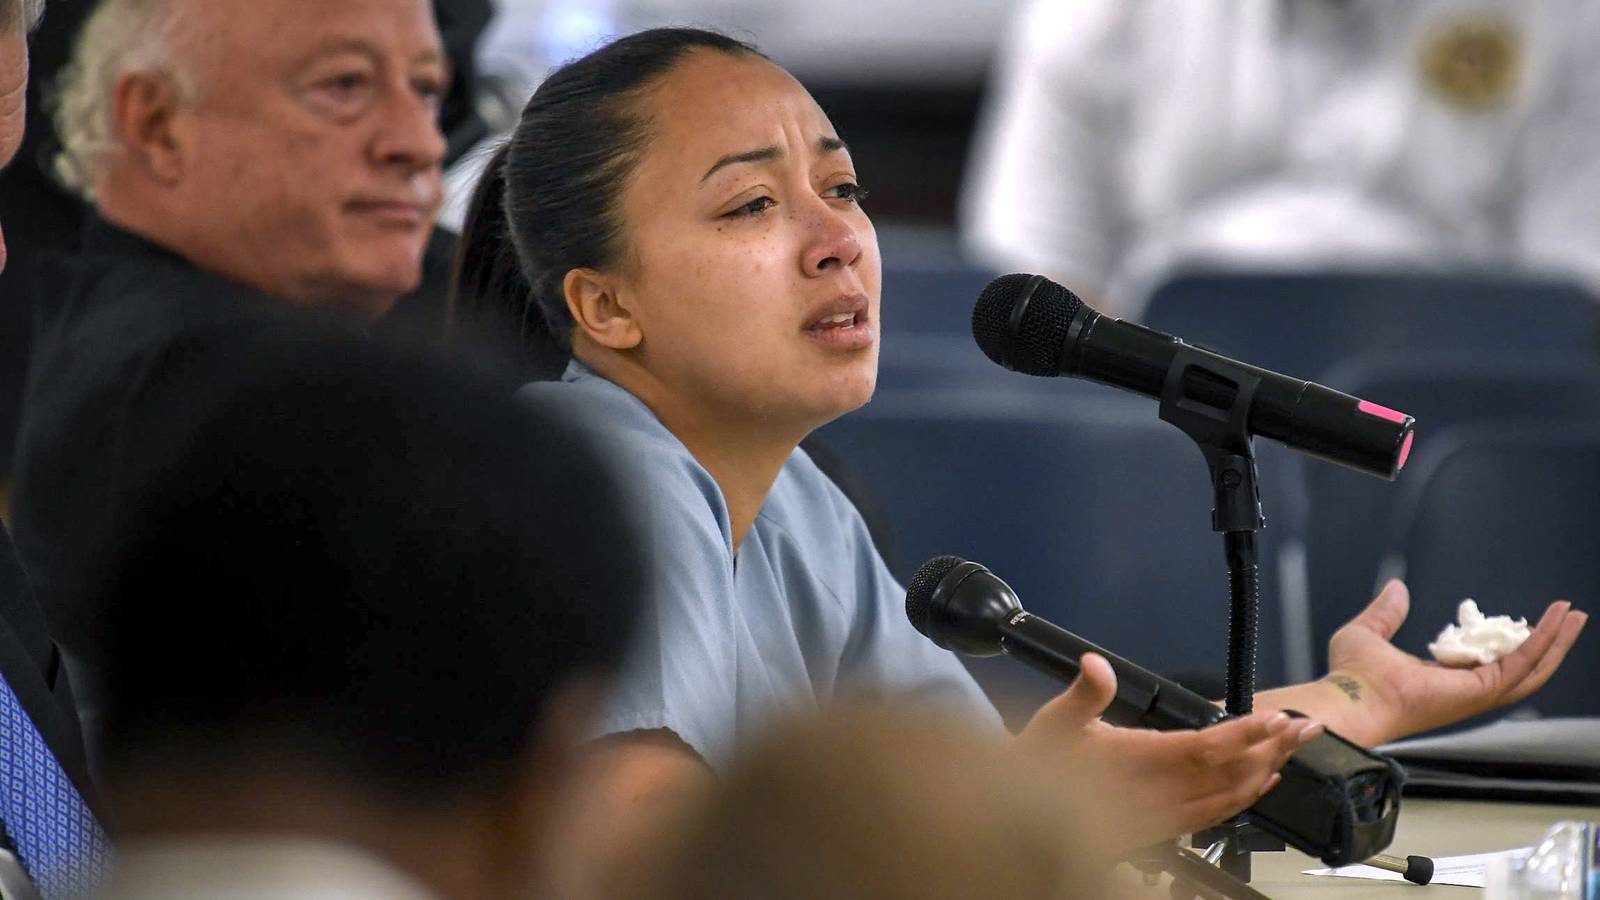 Cyntoia Brown Who Killed Man She Says Was Trafficking Her For Sex Granted Clemency Wsb Tv